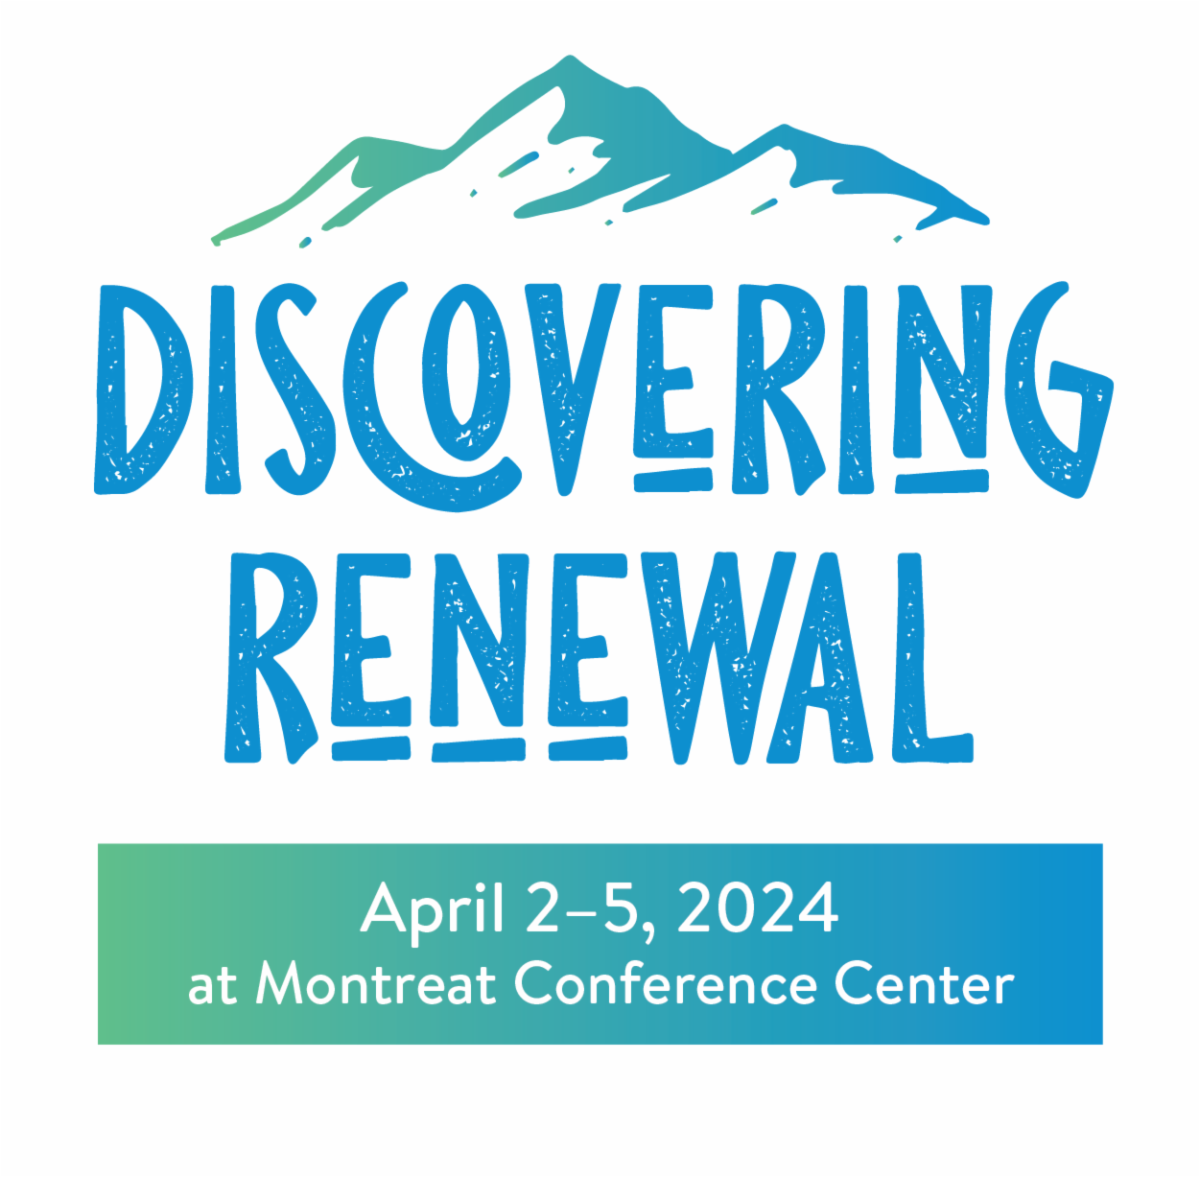 Discovering Renewal - April 2-5, 2024 at Montreat Conference Center